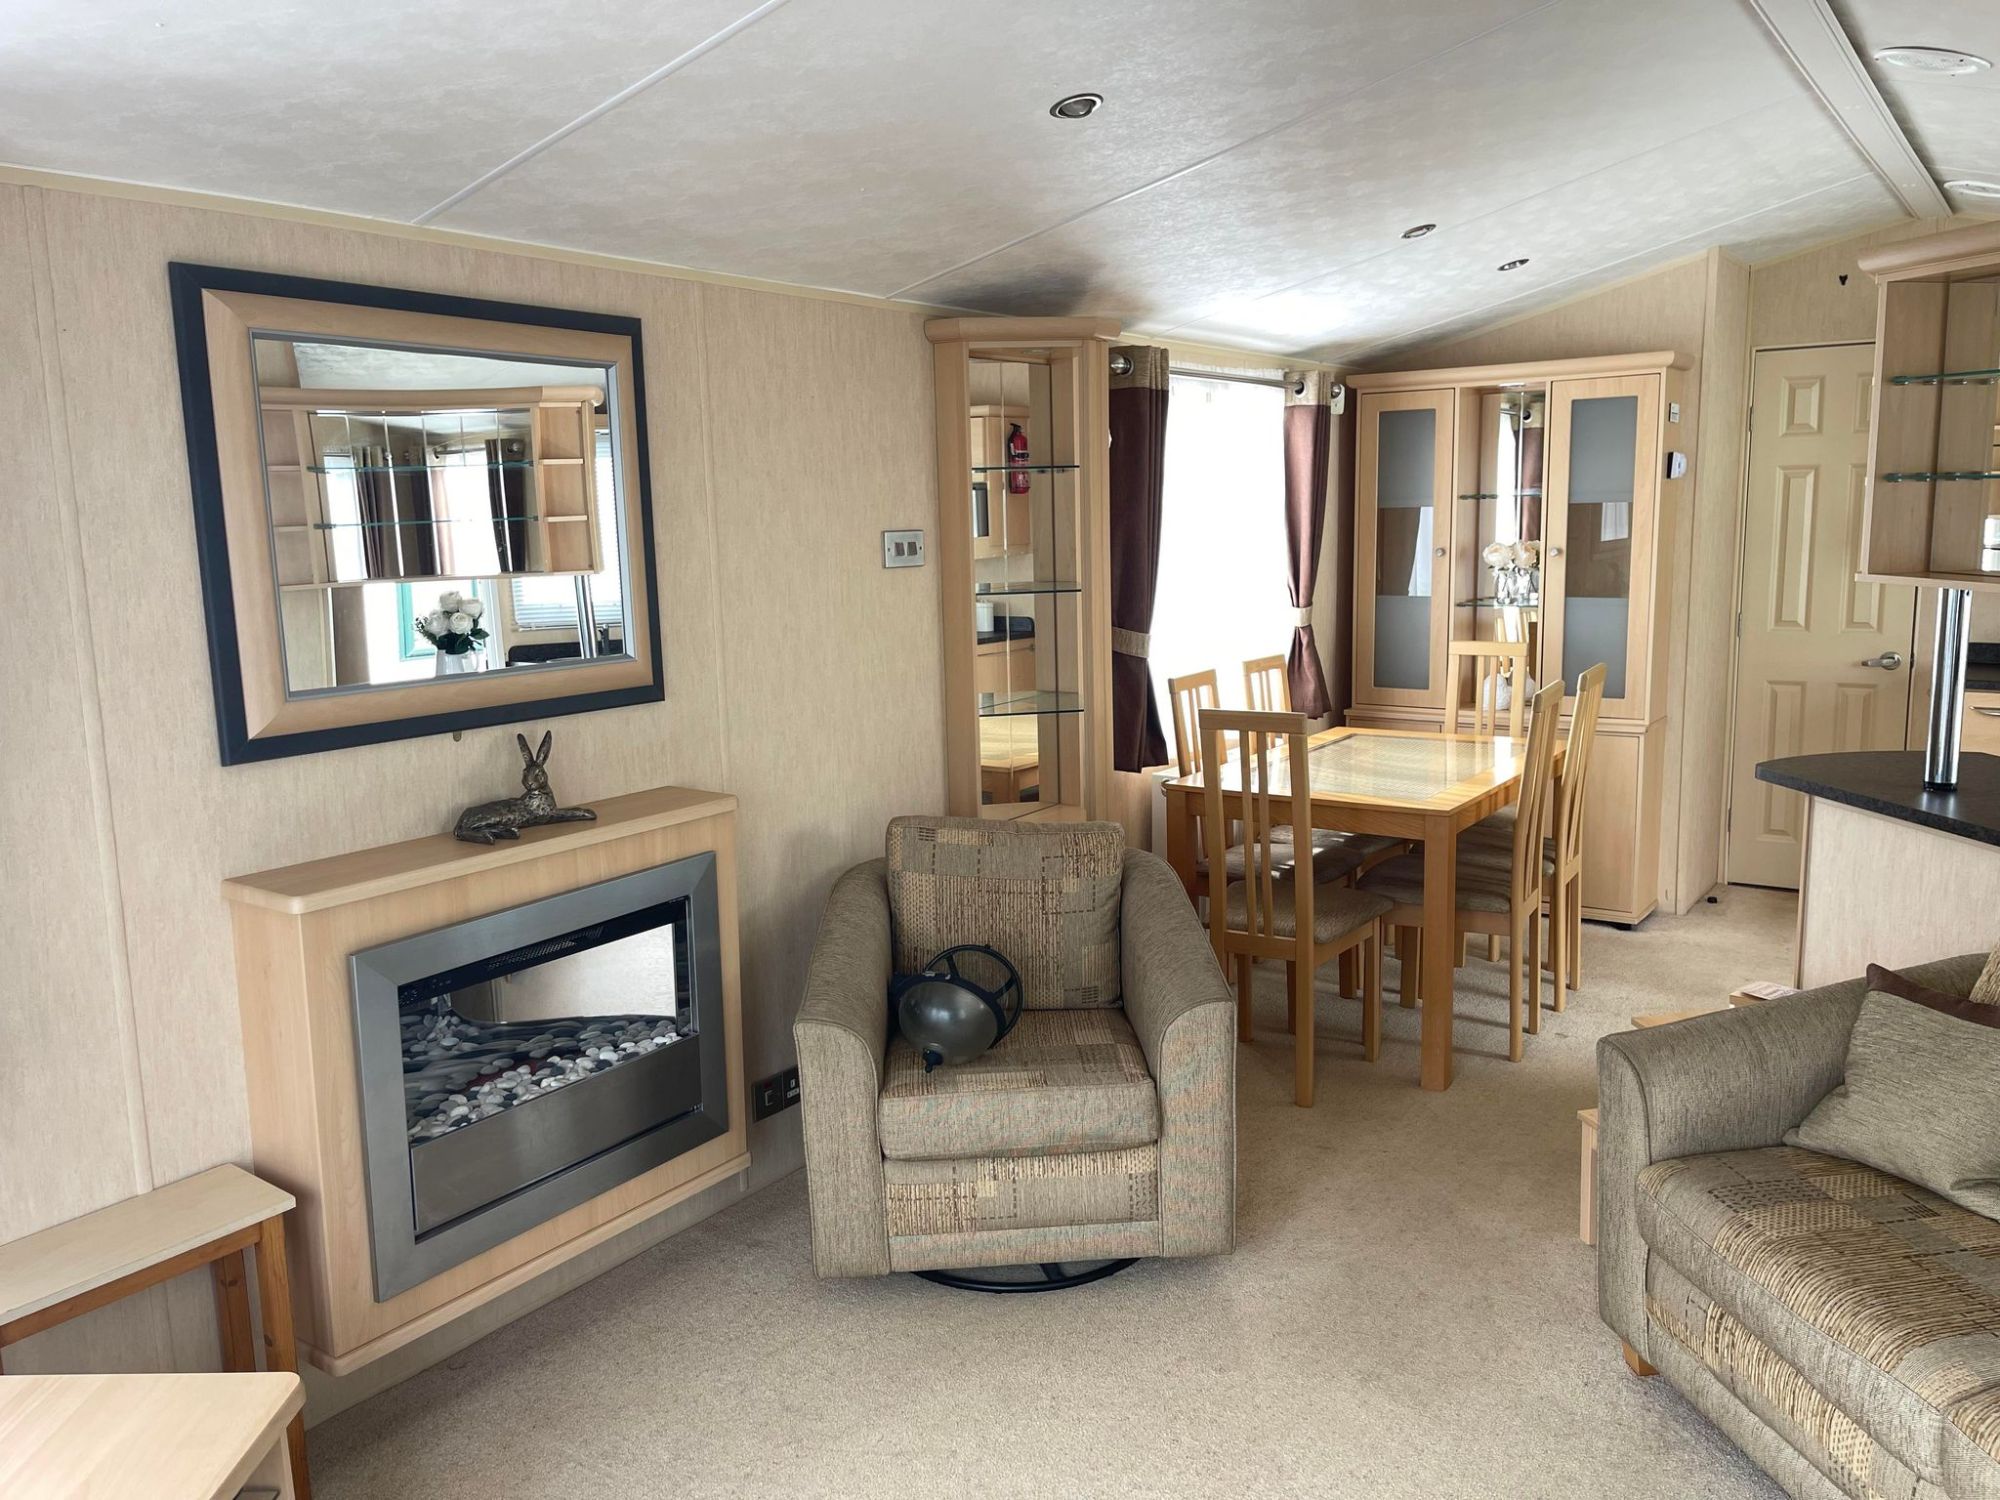 2008 Willerby Winchester Lounge 2